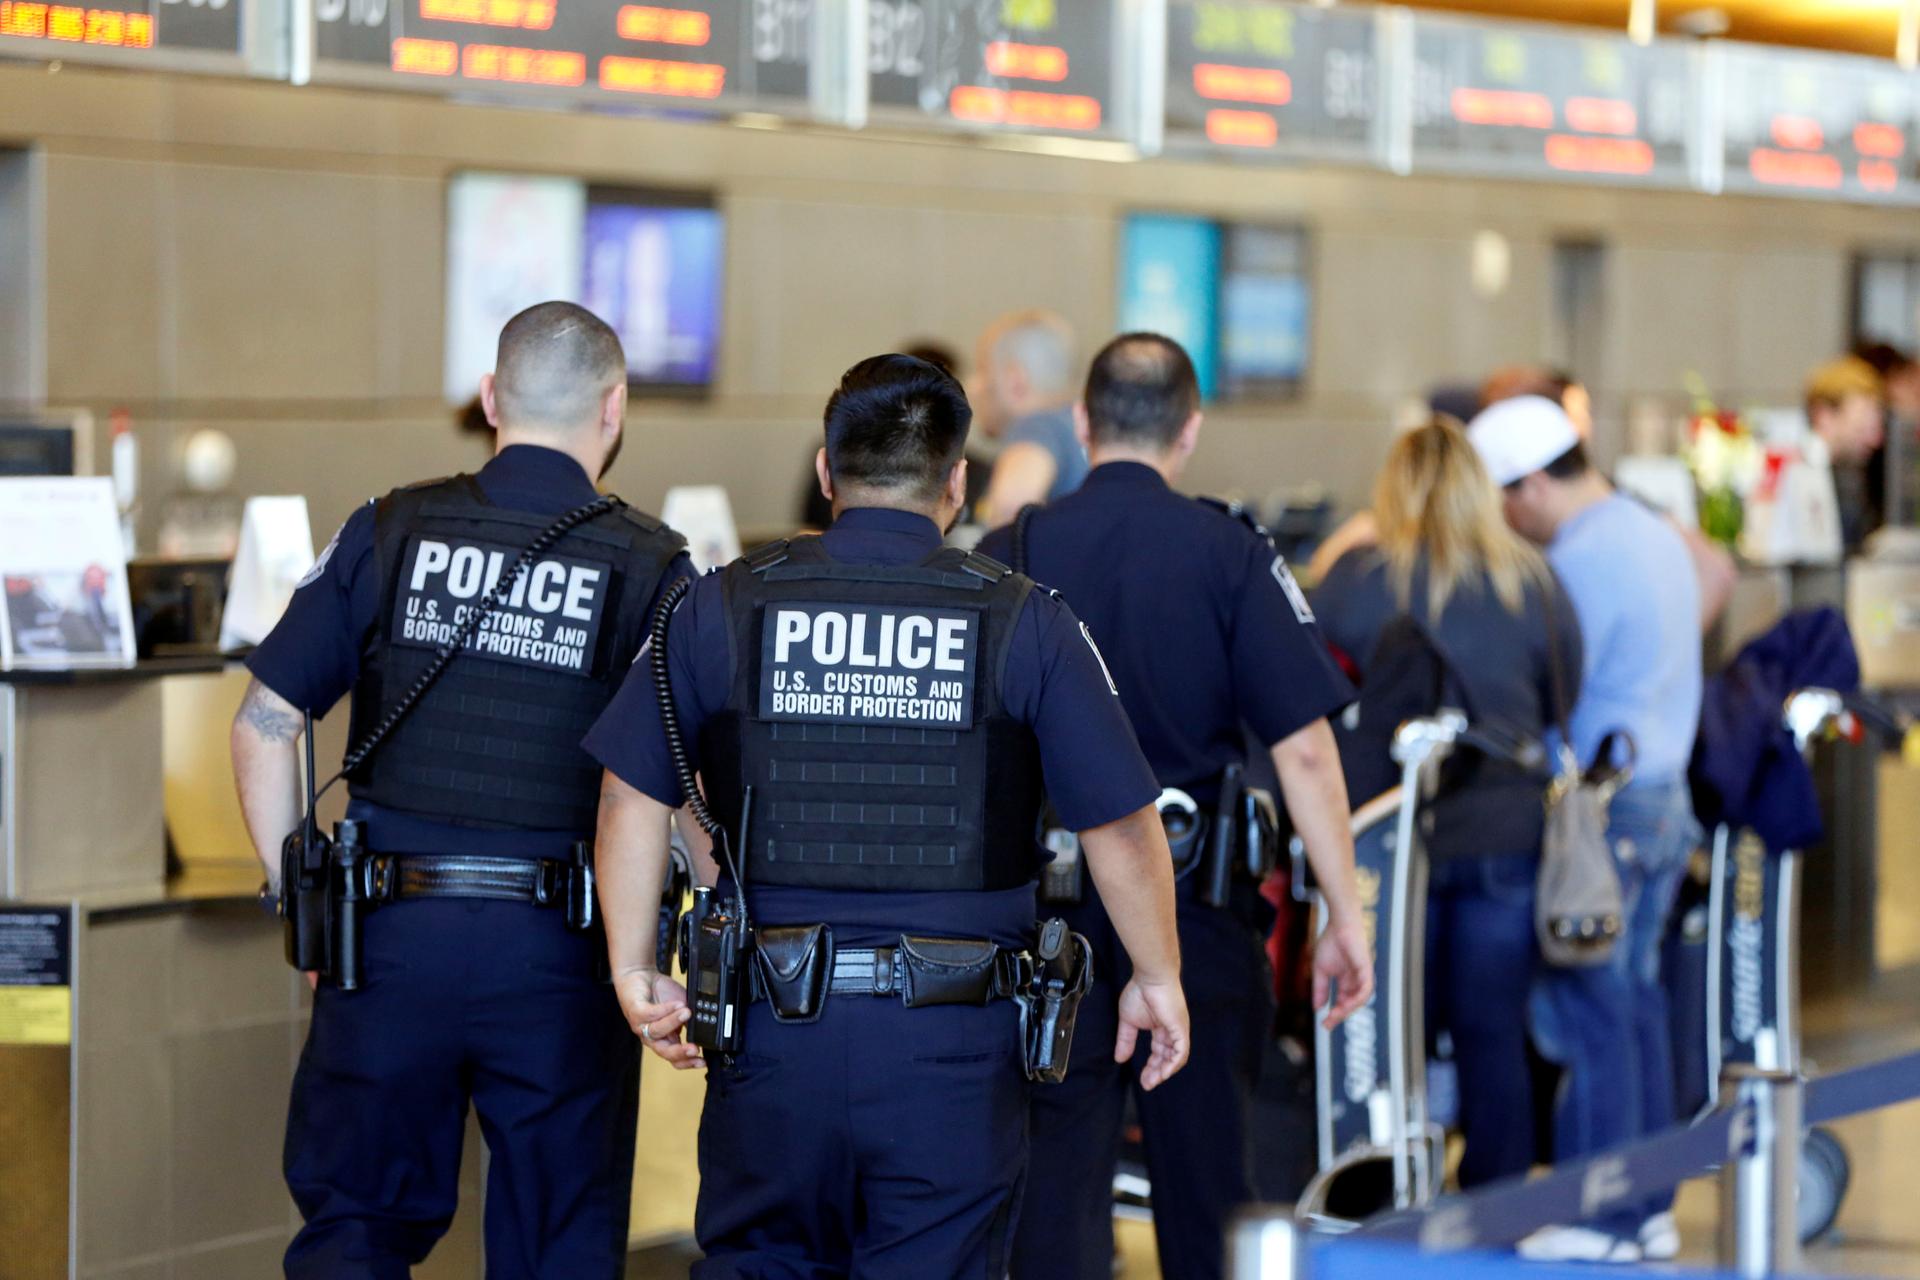 Officers with US Customs and Border Protection walk past ticket counters